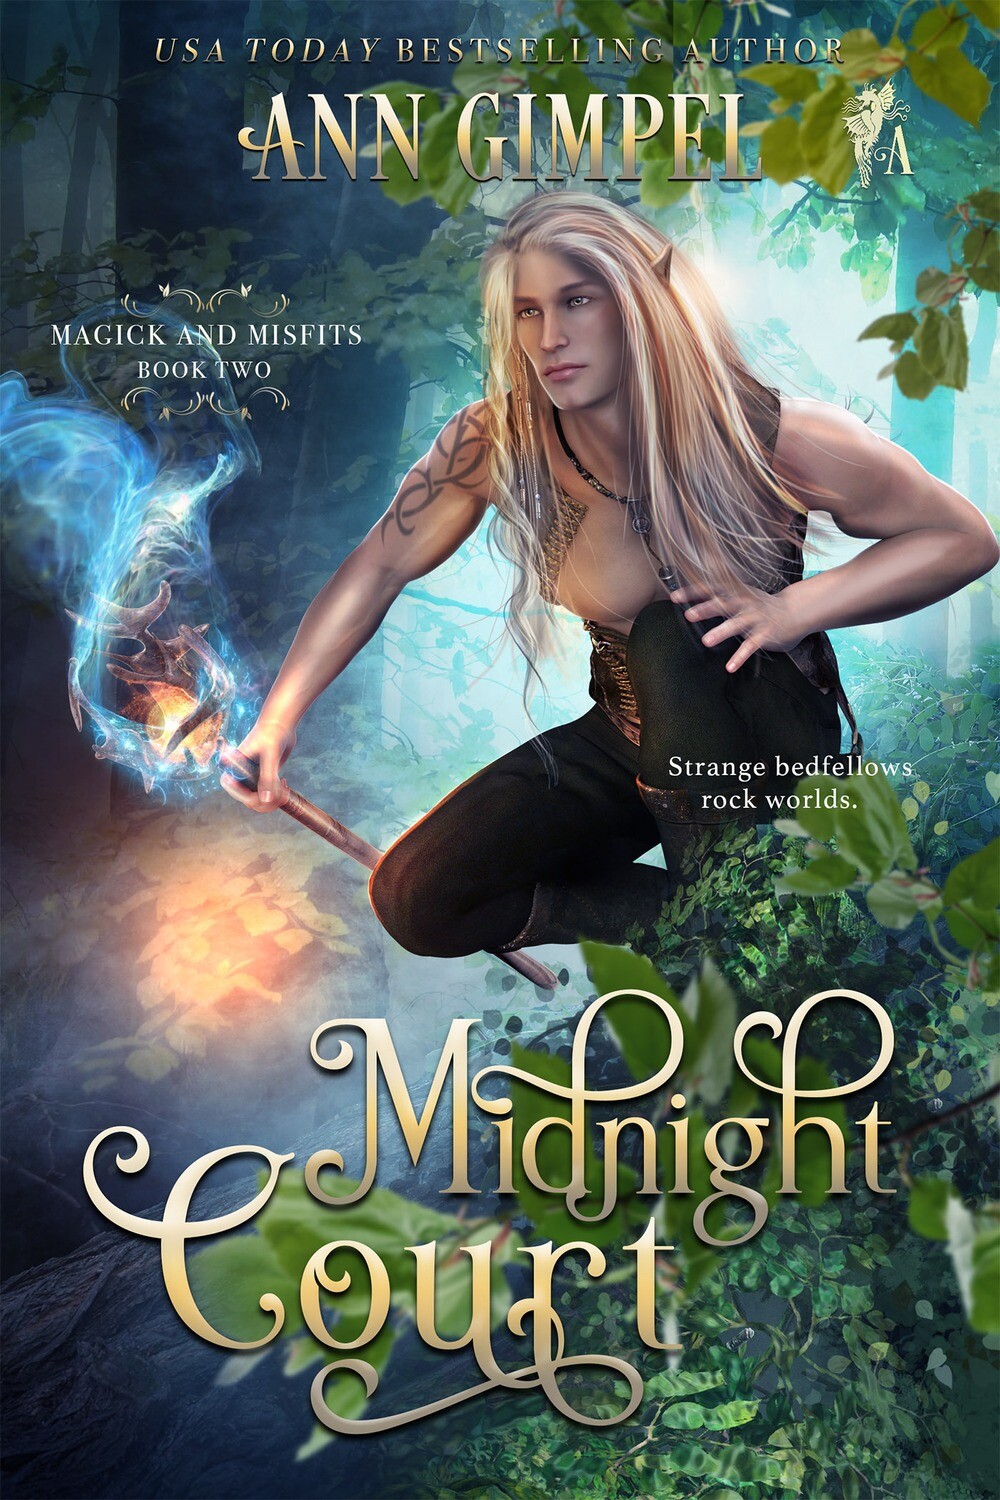 Midnight Court, Magick and Misfits Book Two